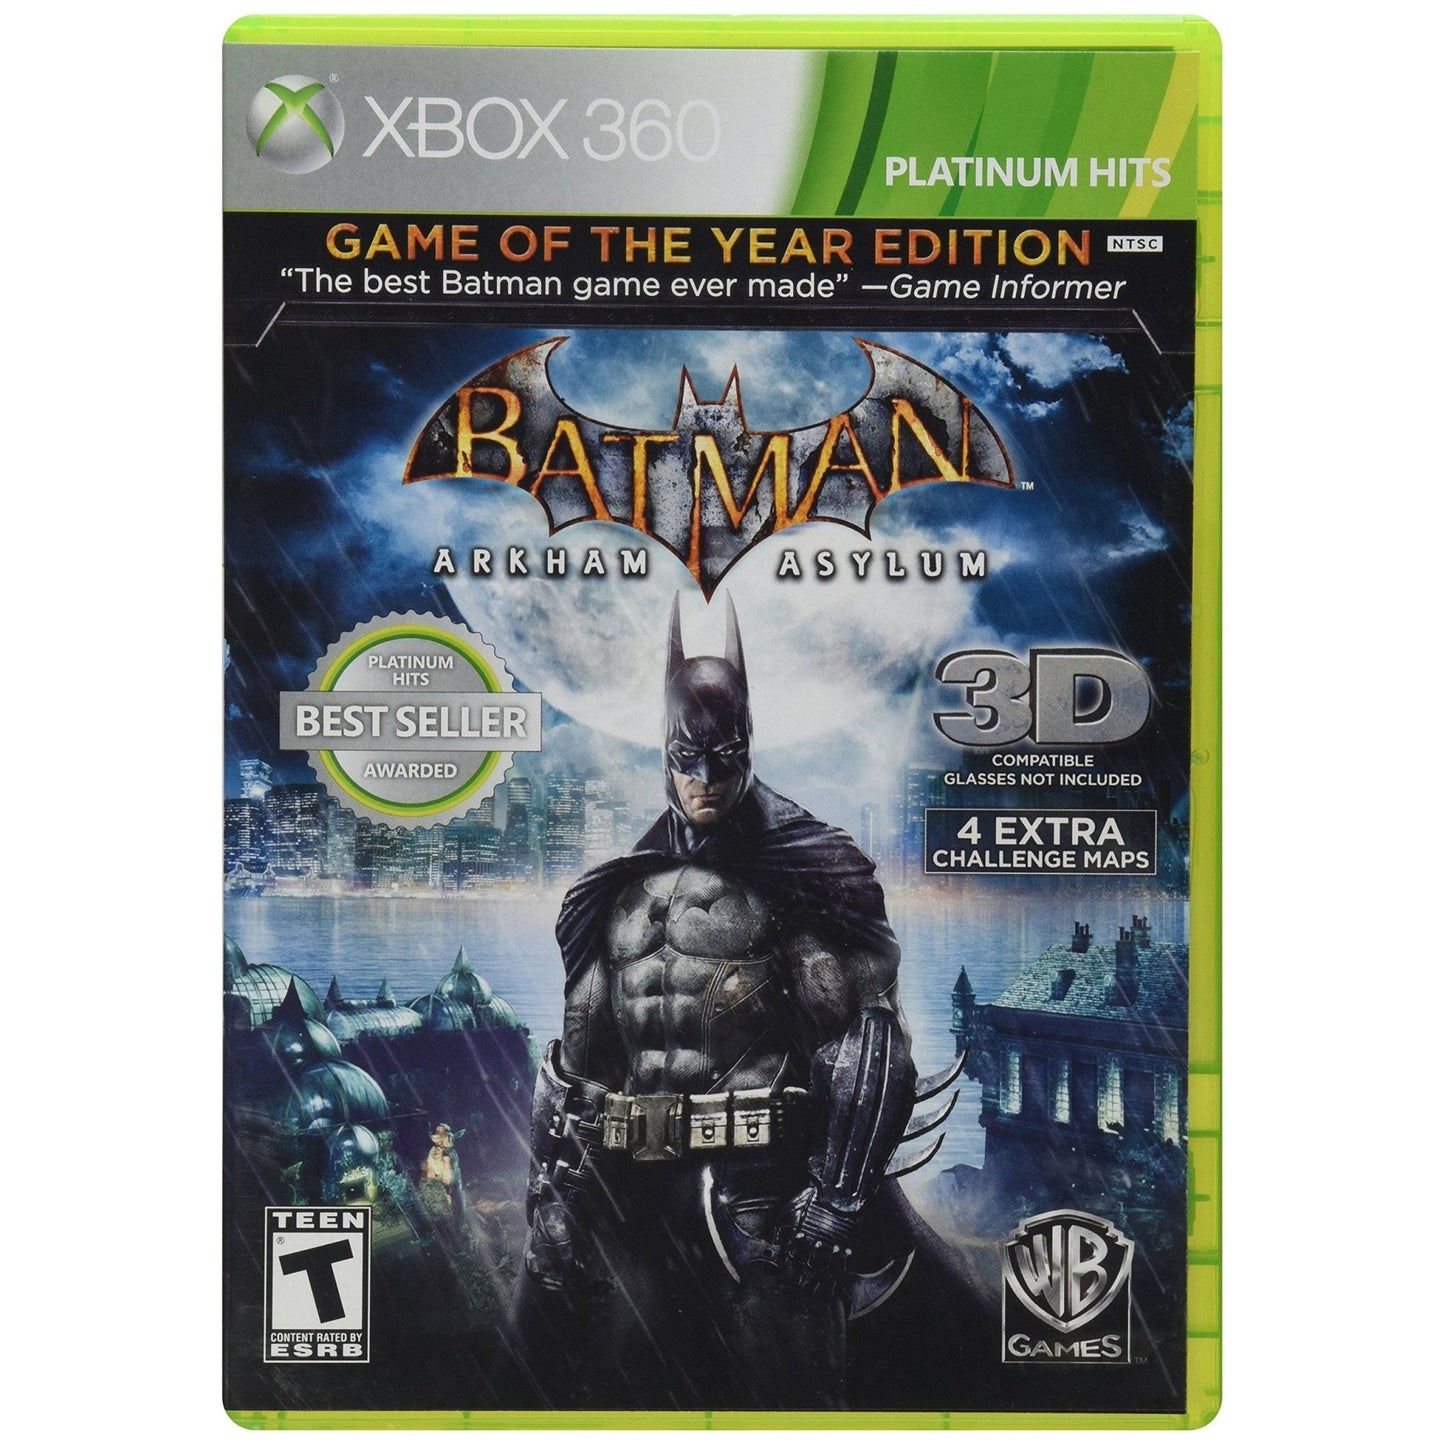 Batman Arkham Asylum Game of the Year Edition Xbox 360 Game from 2P Gaming